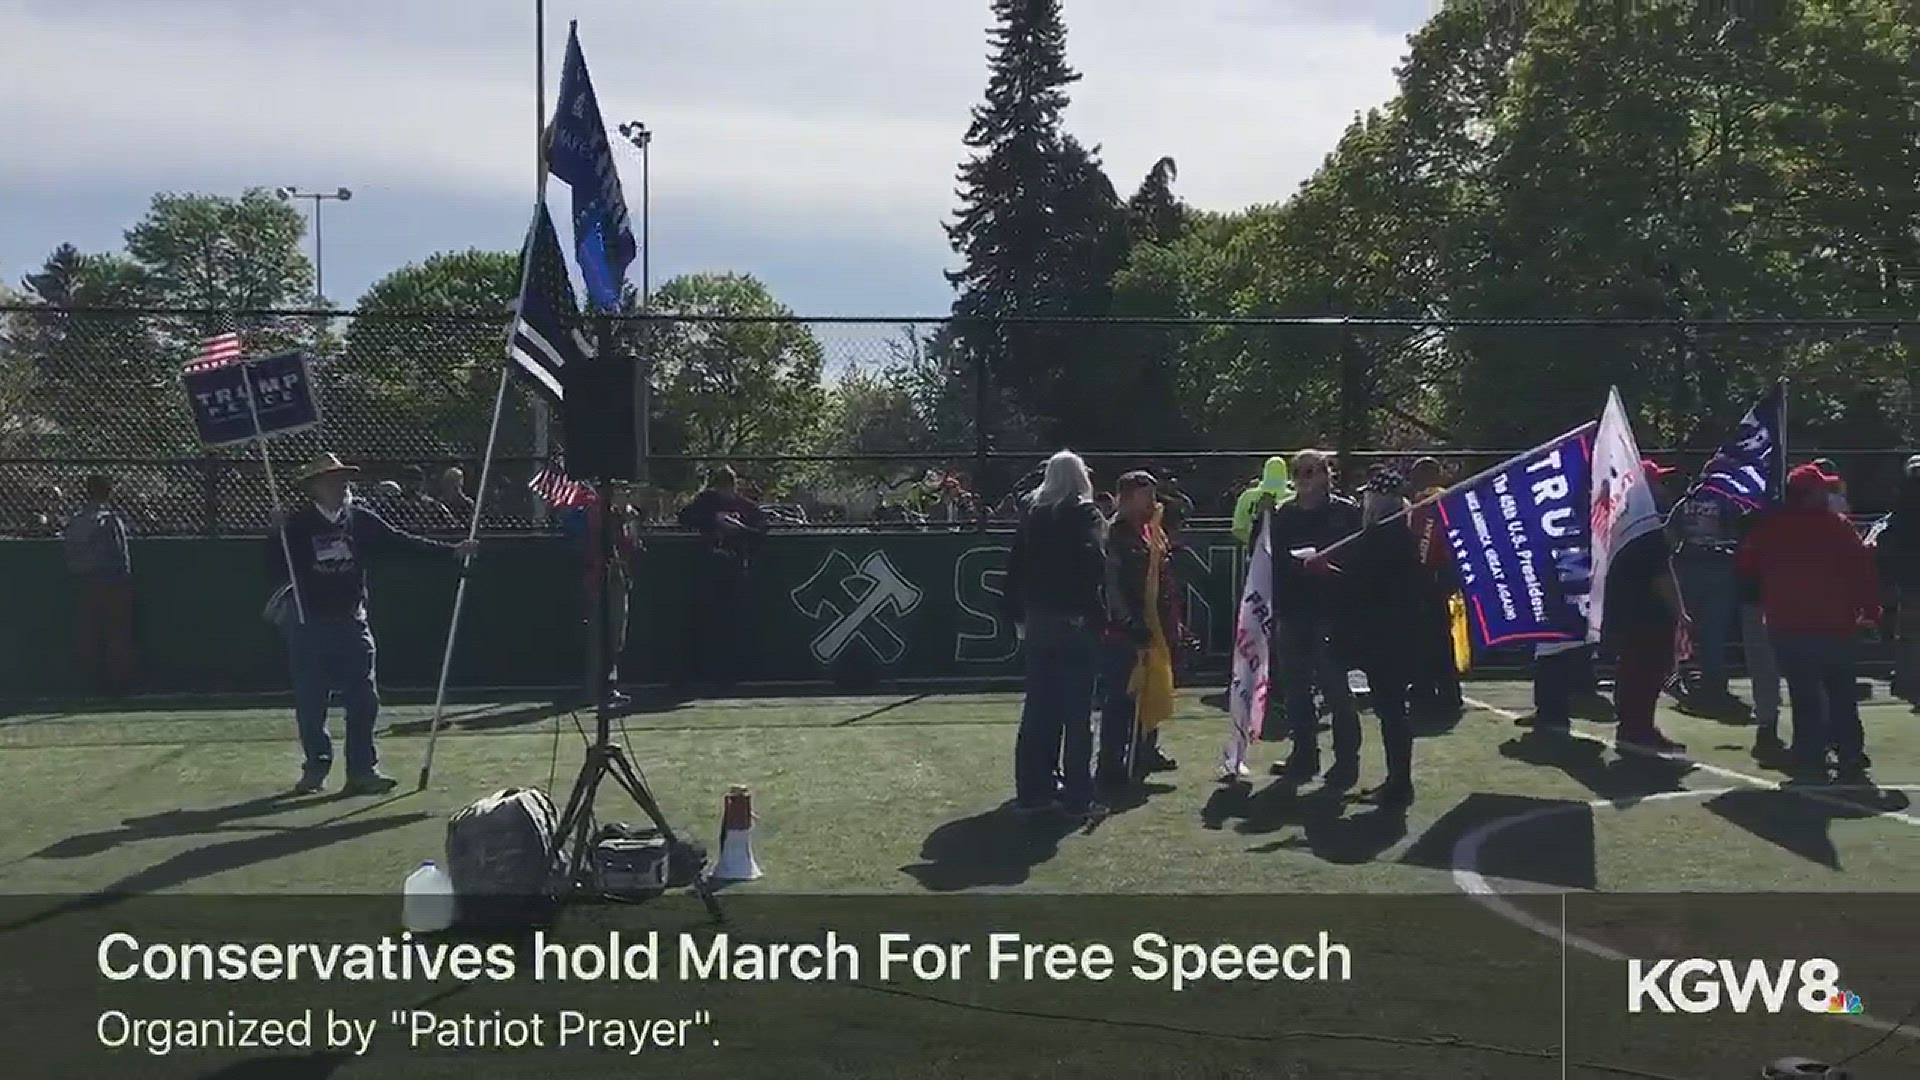 'March for Free Speech' gathers at Montavilla Park